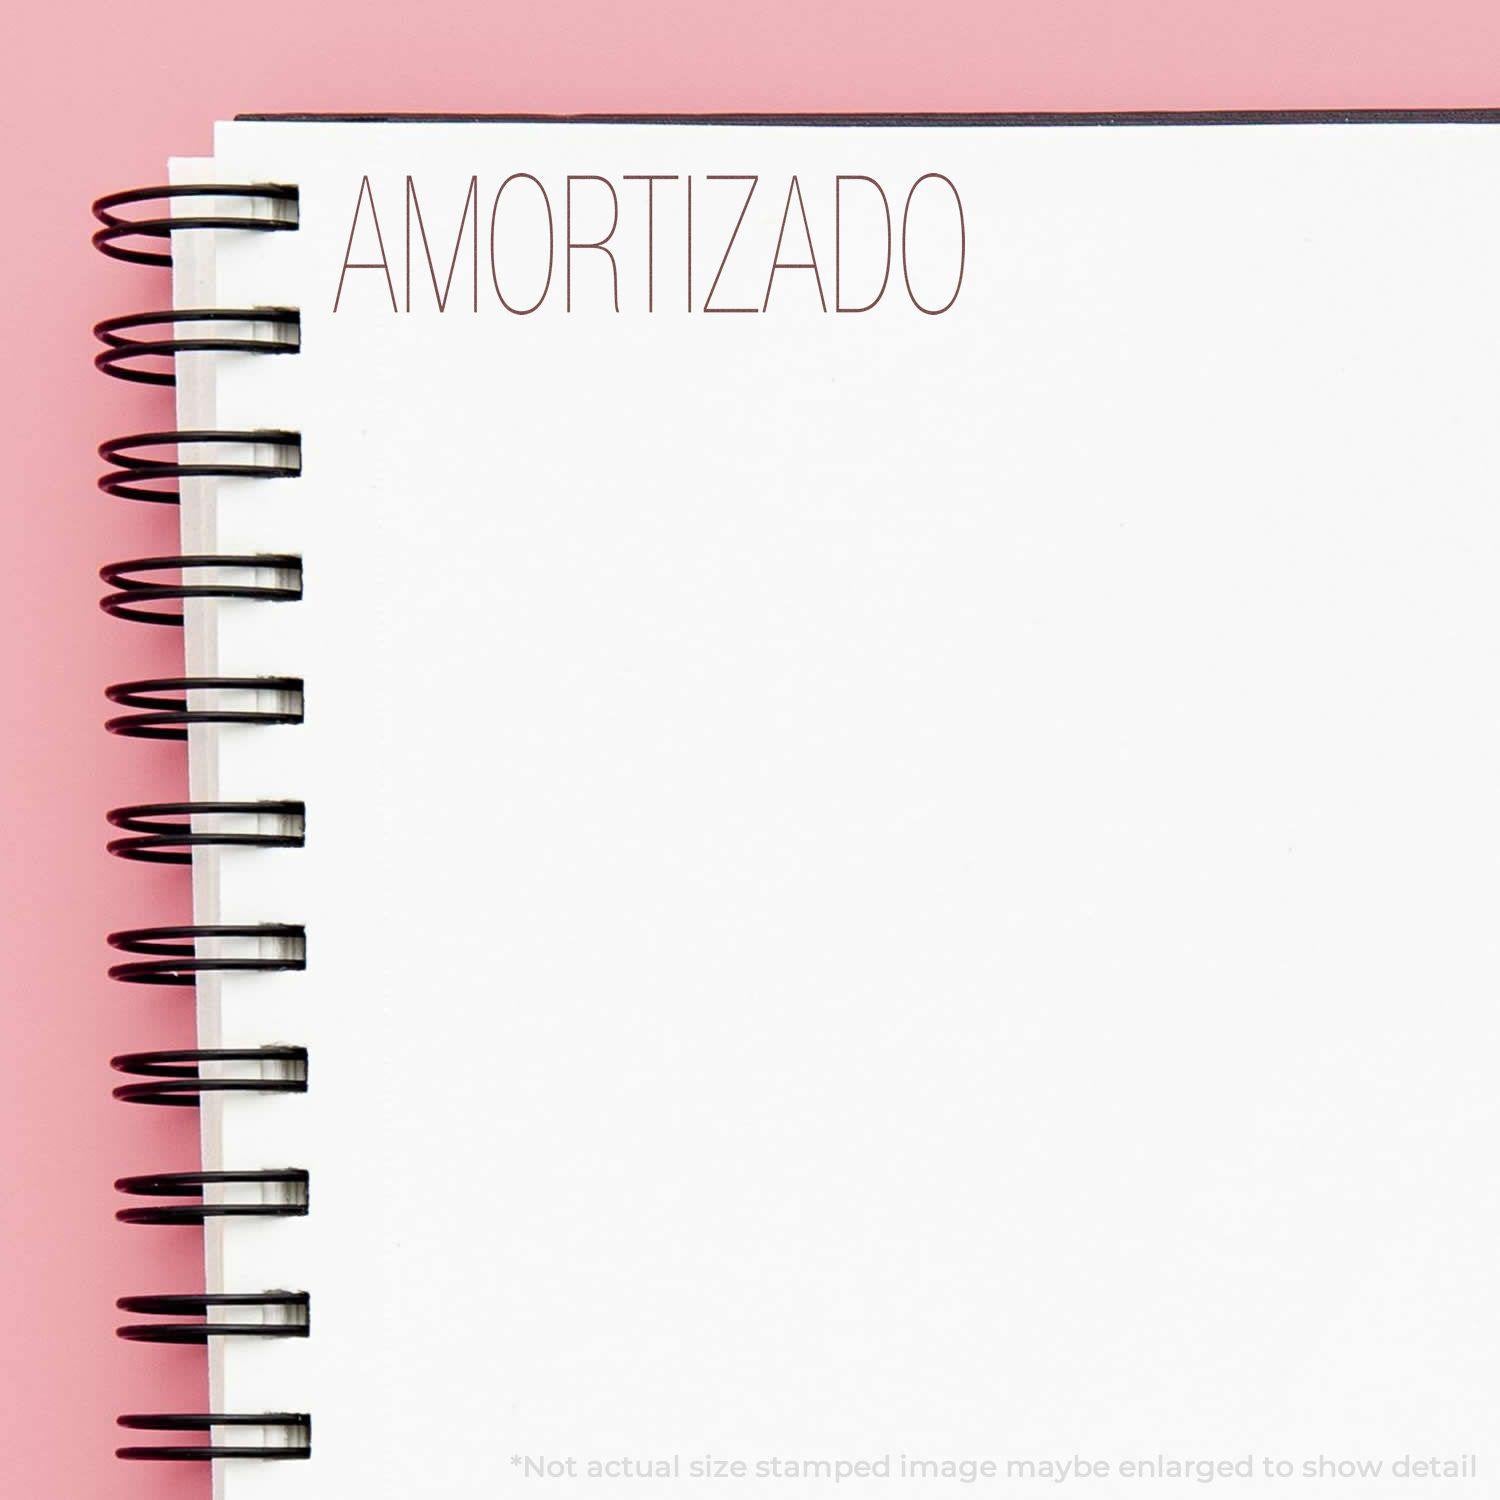 A self-inking stamp with a stamped image showing how the word "AMORTIZADO" in a large font is displayed by it after stamping.